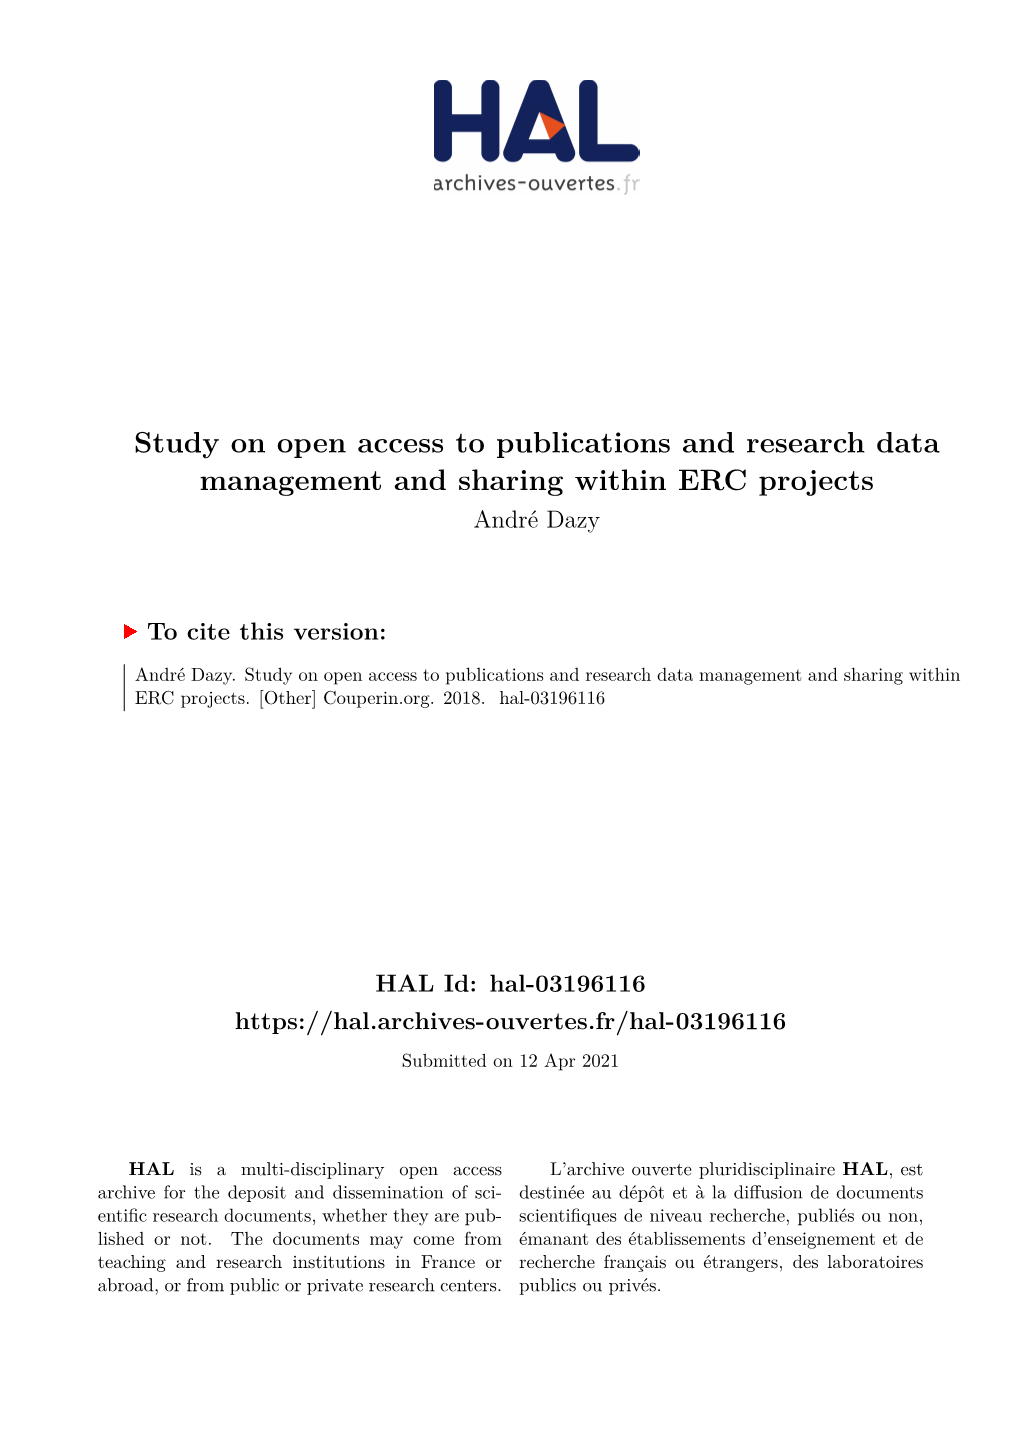 Study on Open Access to Publications and Research Data Management and Sharing Within ERC Projects André Dazy